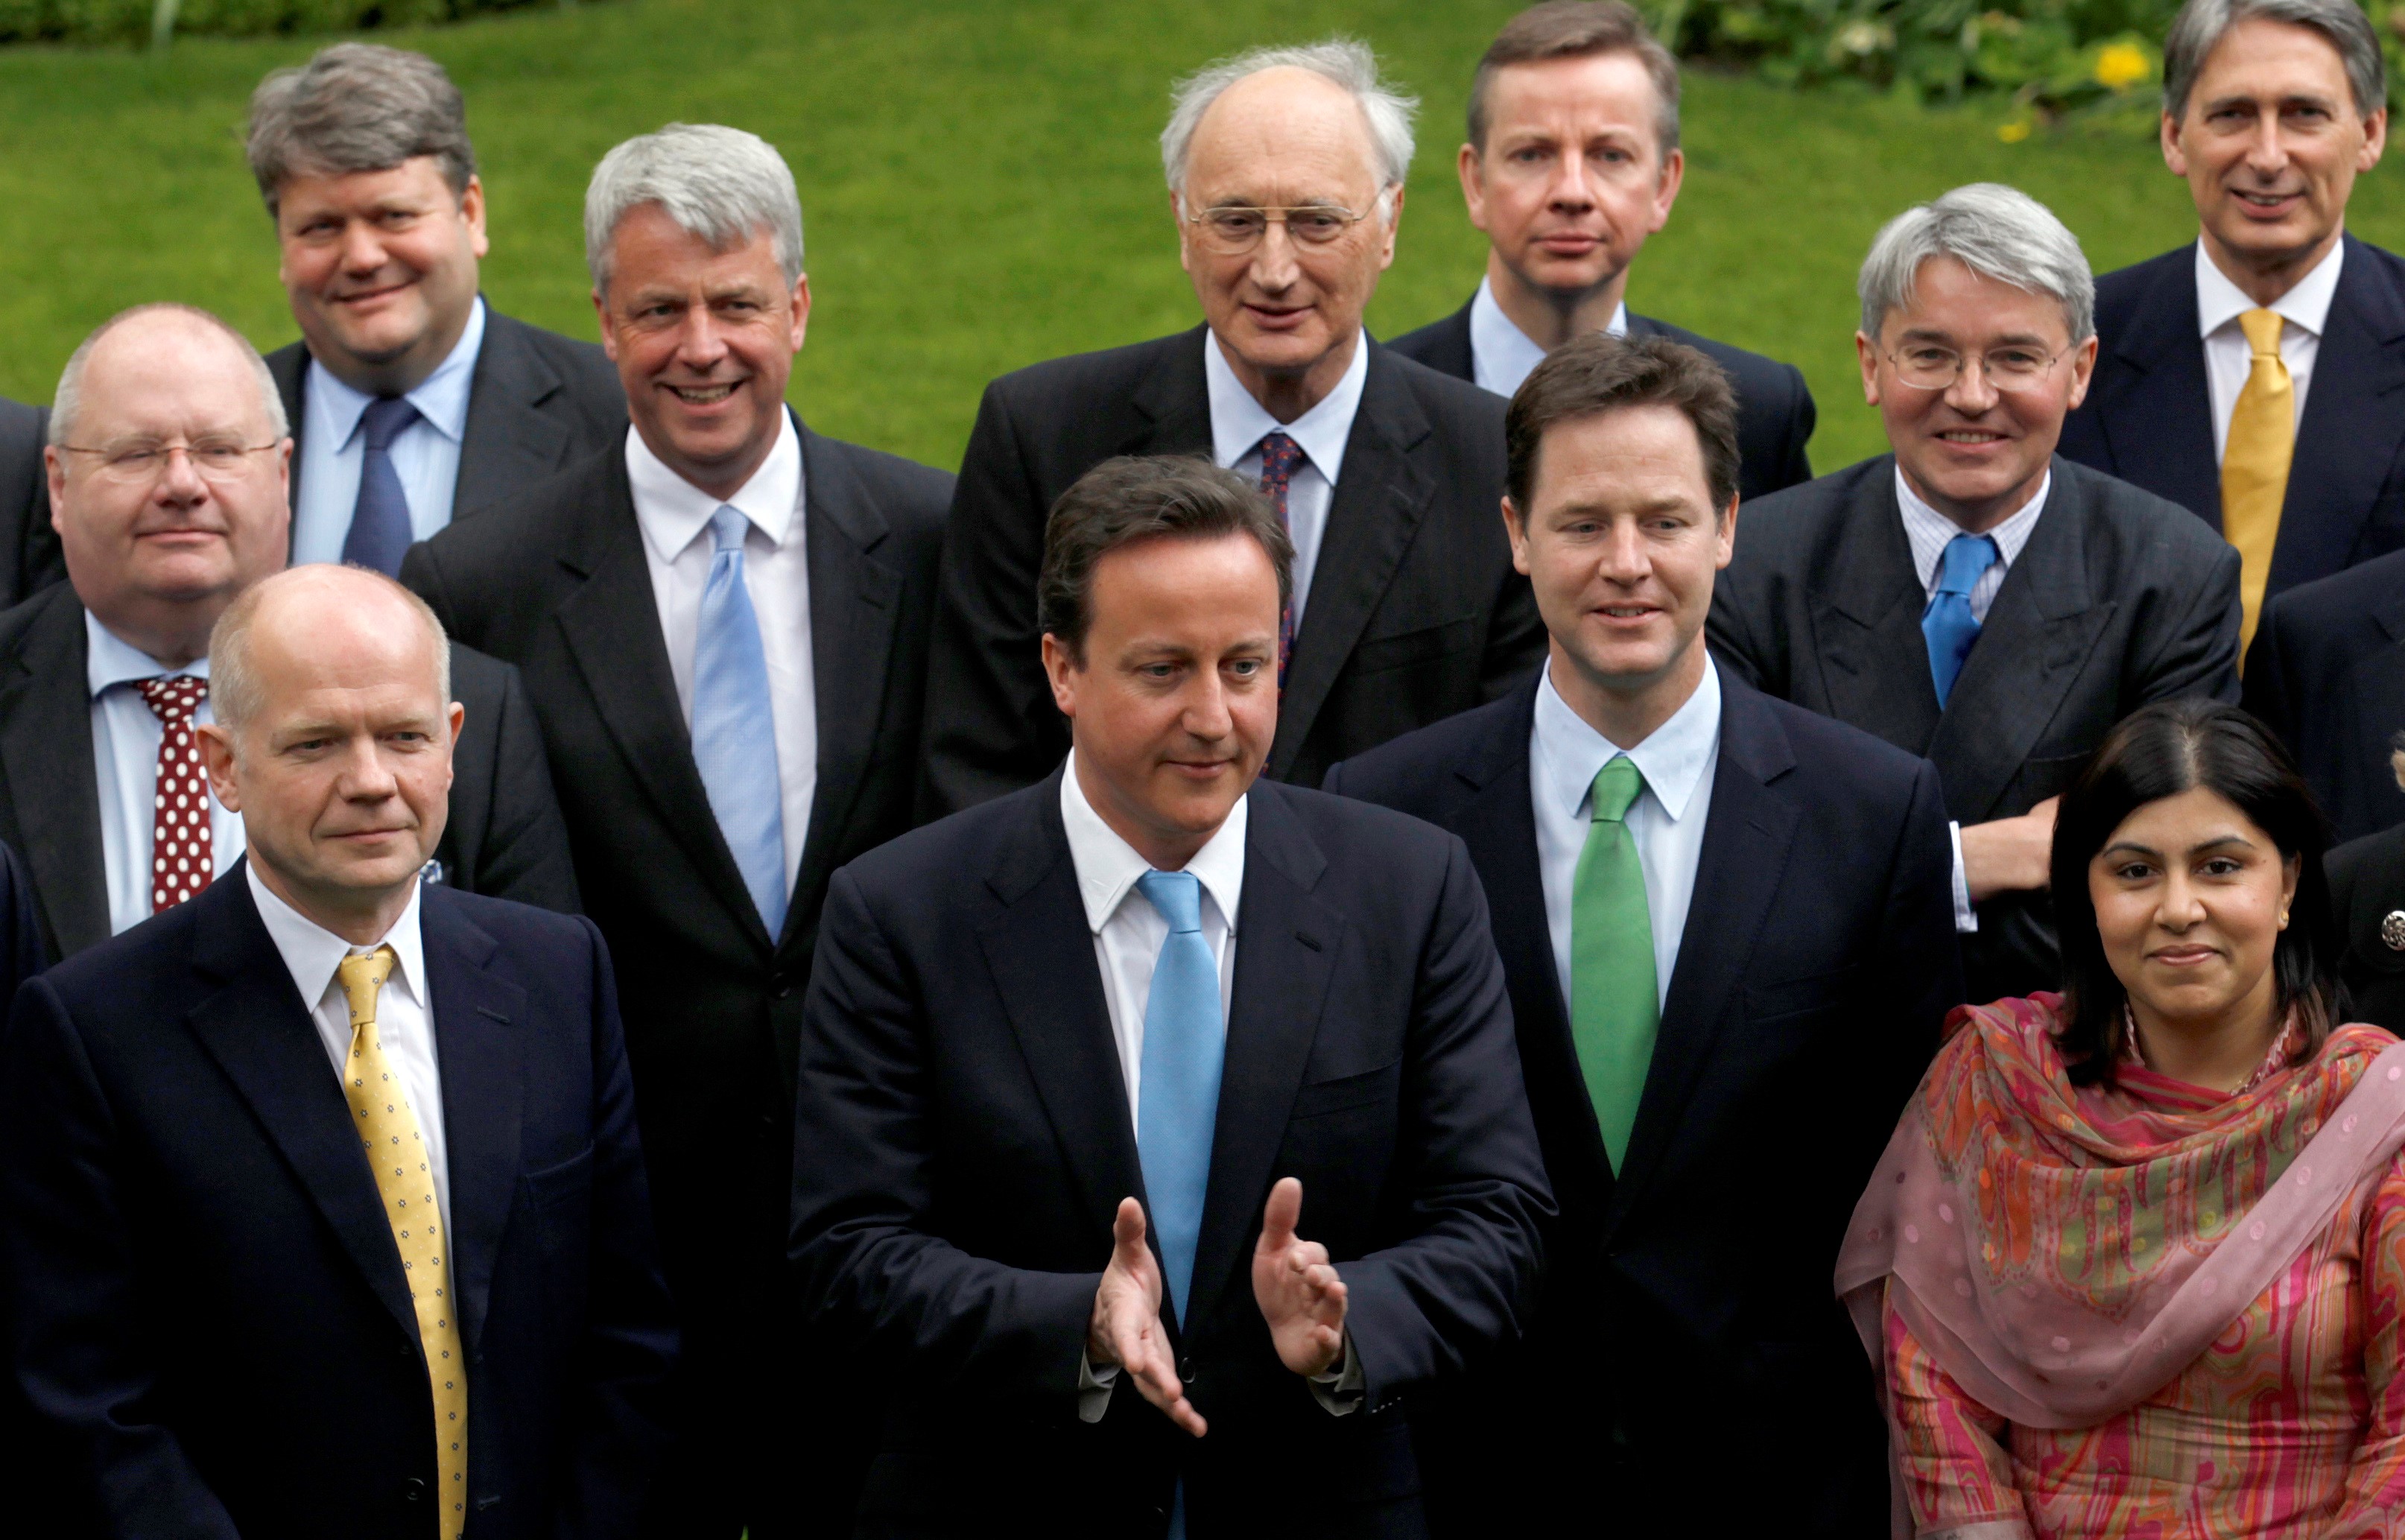  Britain's Prime Minister David Cameron in a group picture with his new cabinet in the garden of 10 Downing Street in London May,2010 (Reuters)